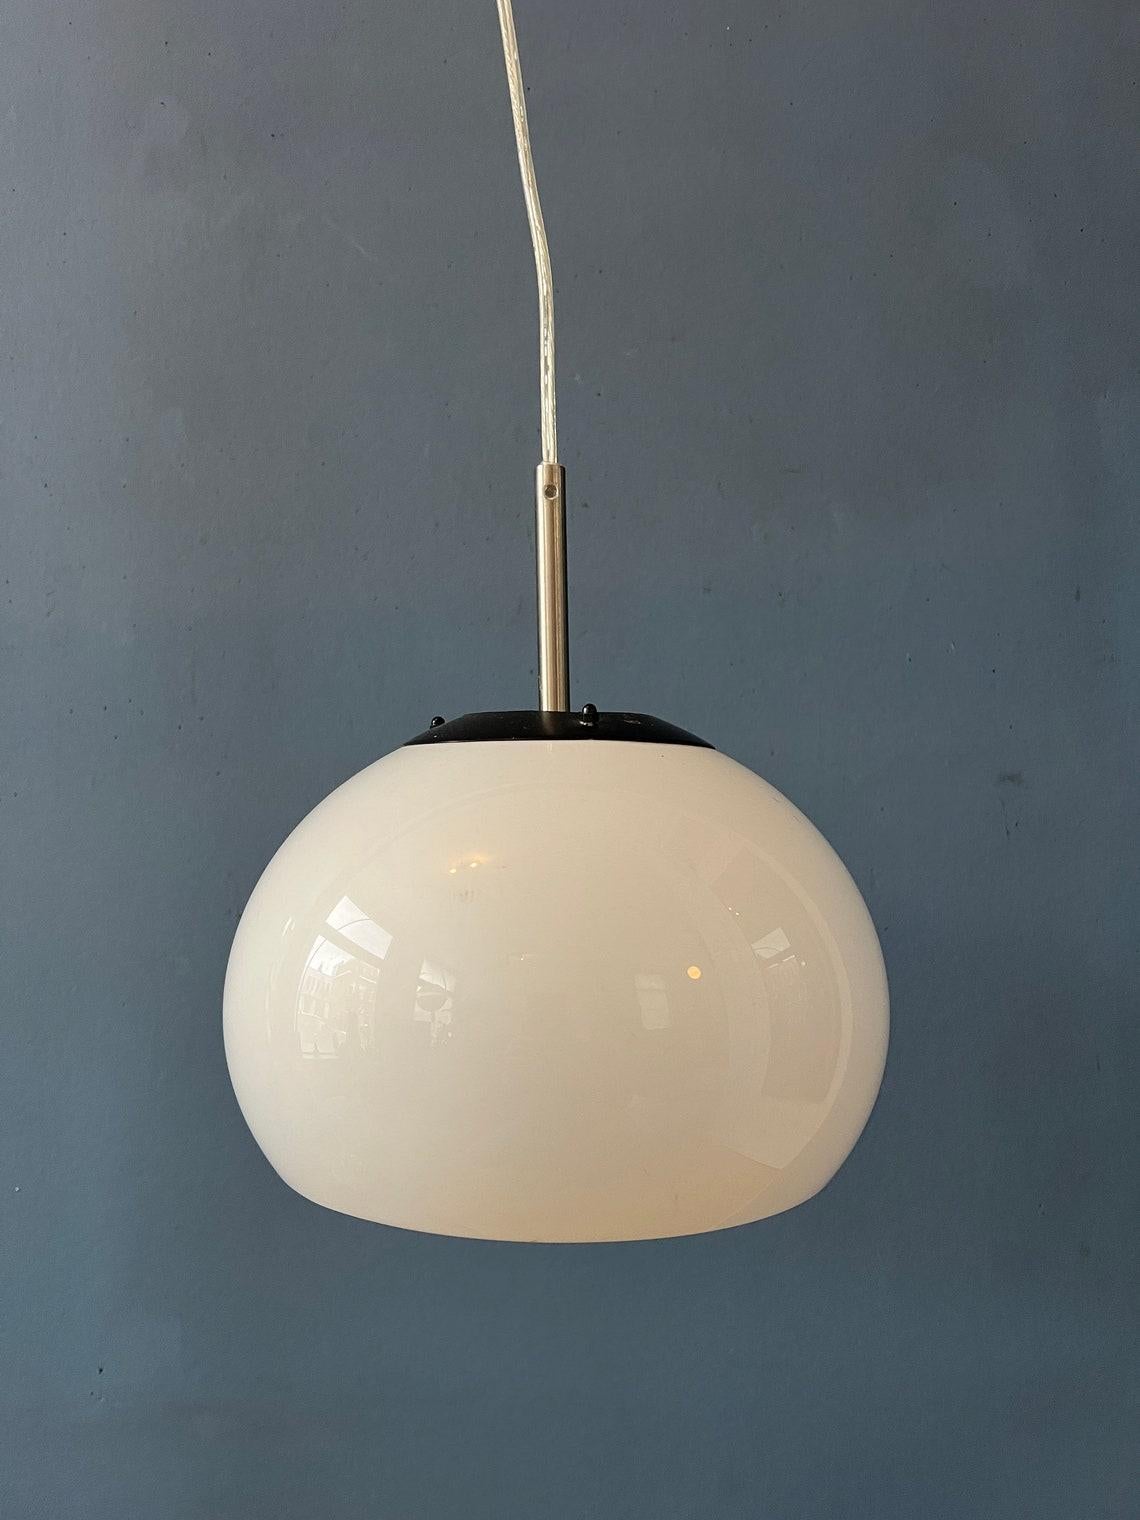 Small White Space Age Mushroom Pendant Lamp, 1970s For Sale 3